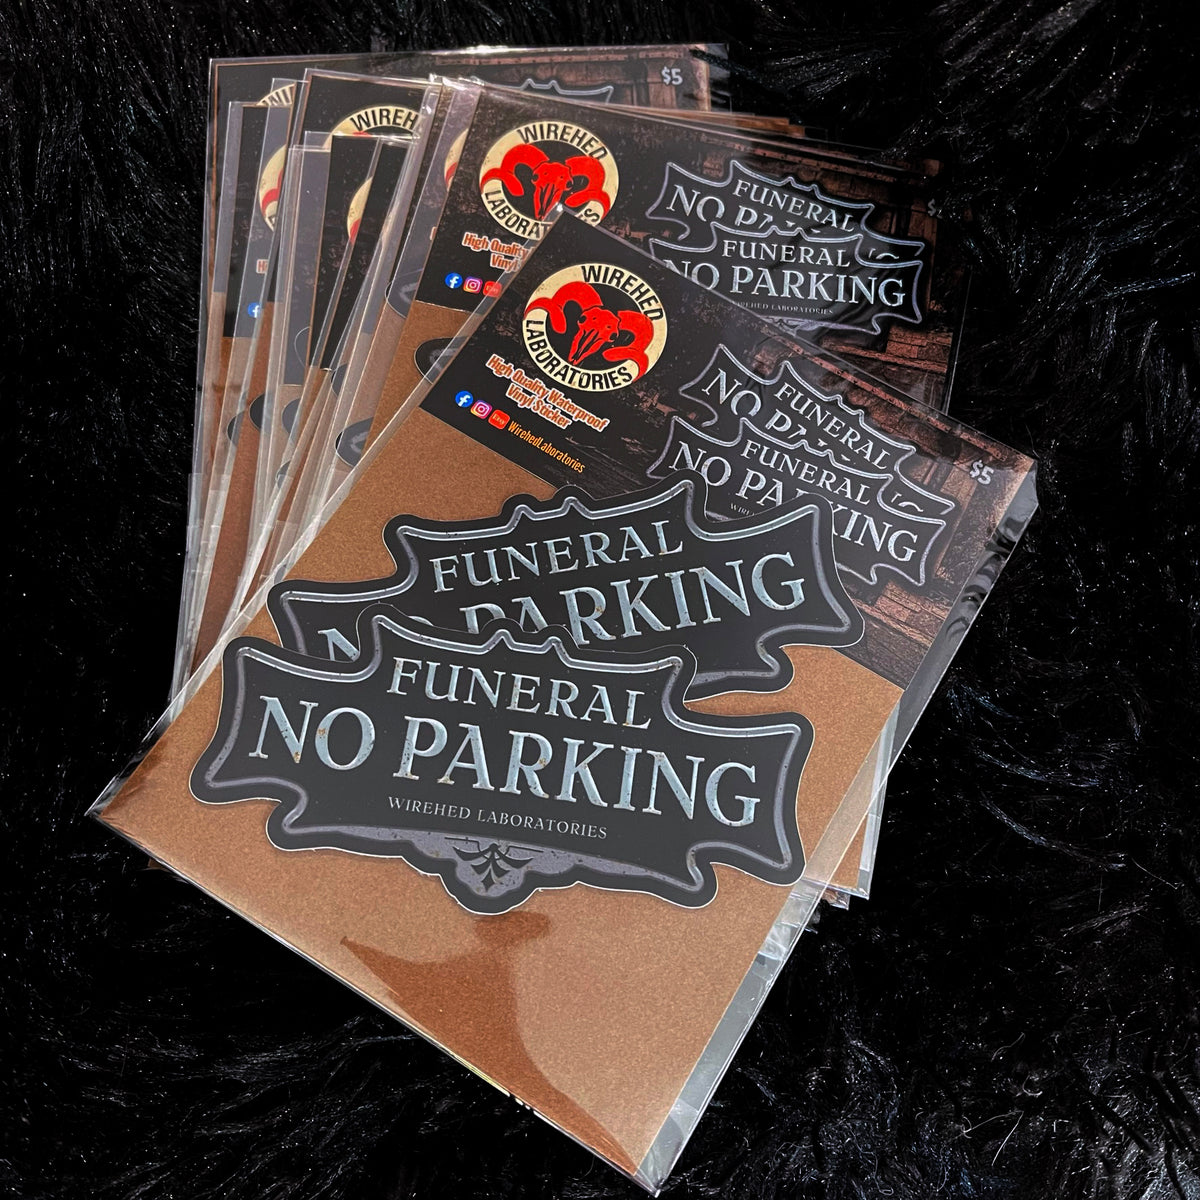 Funeral No Parking! Stickers